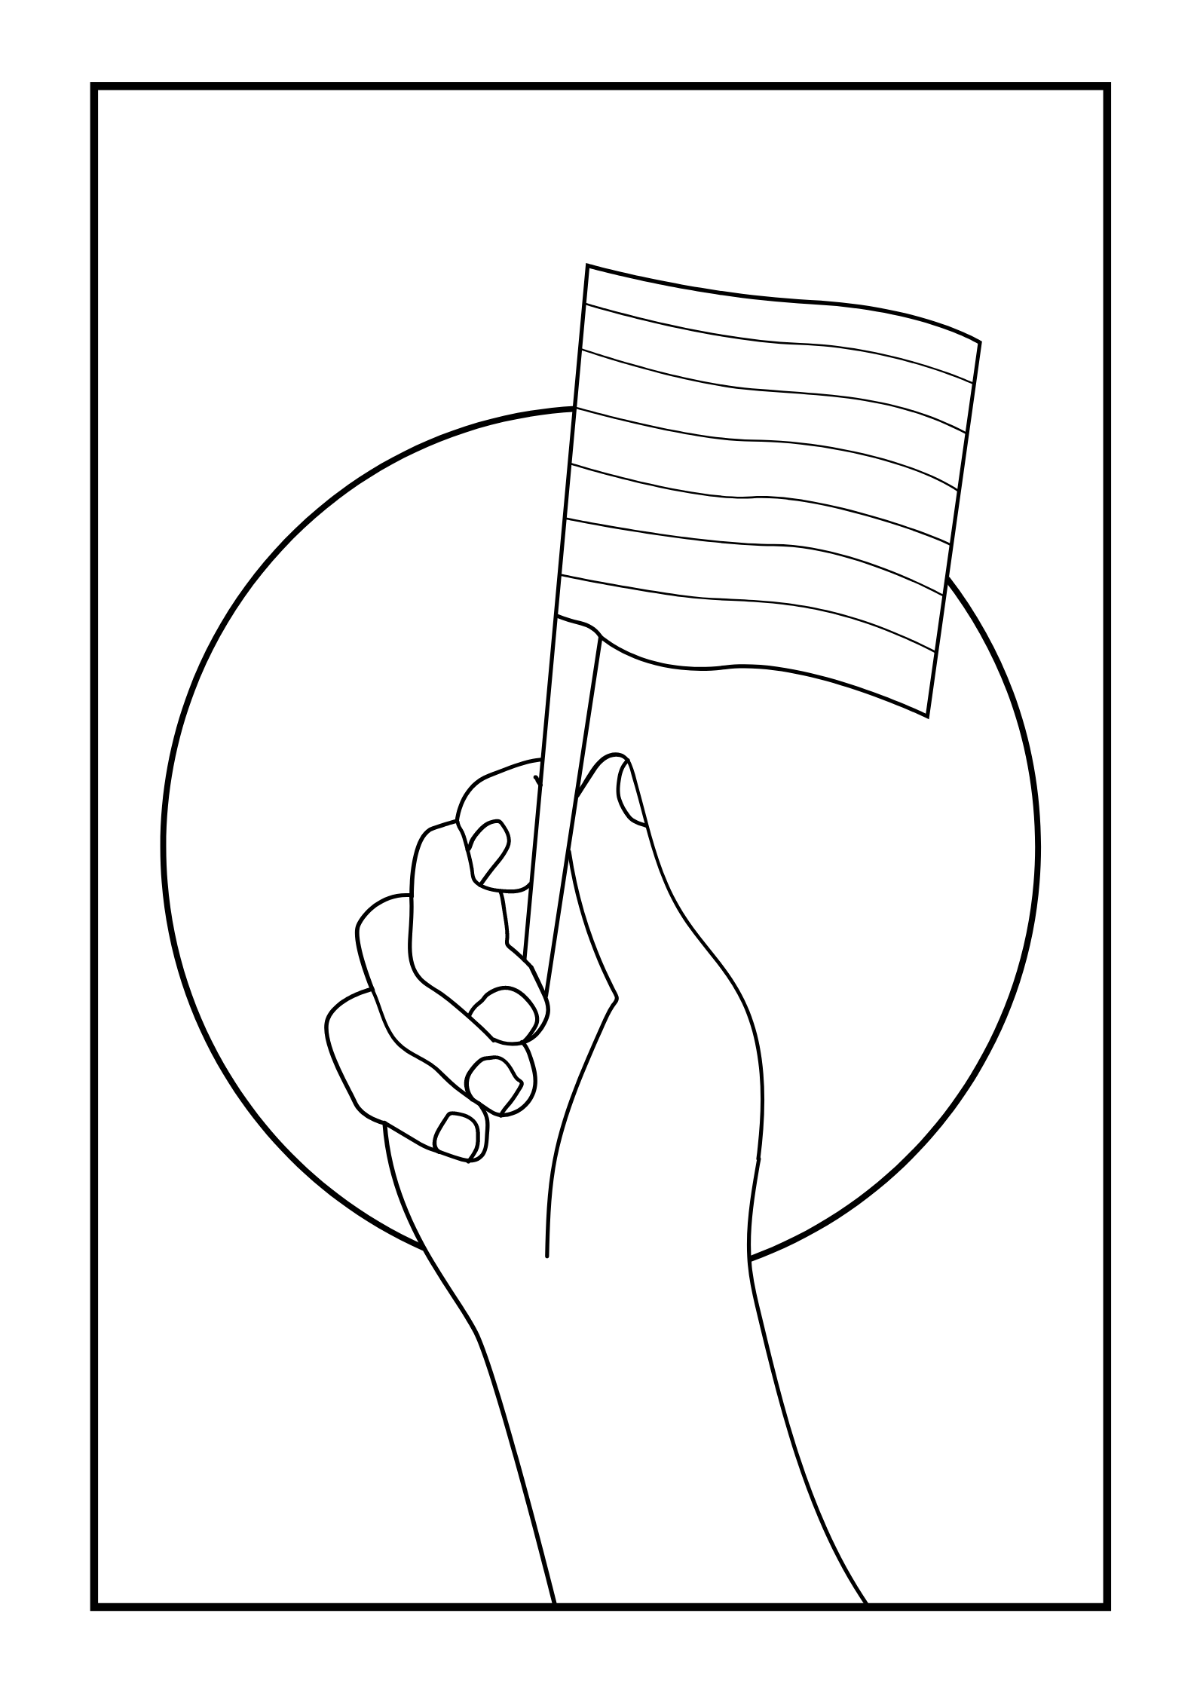 Pride Month Image Drawing Template